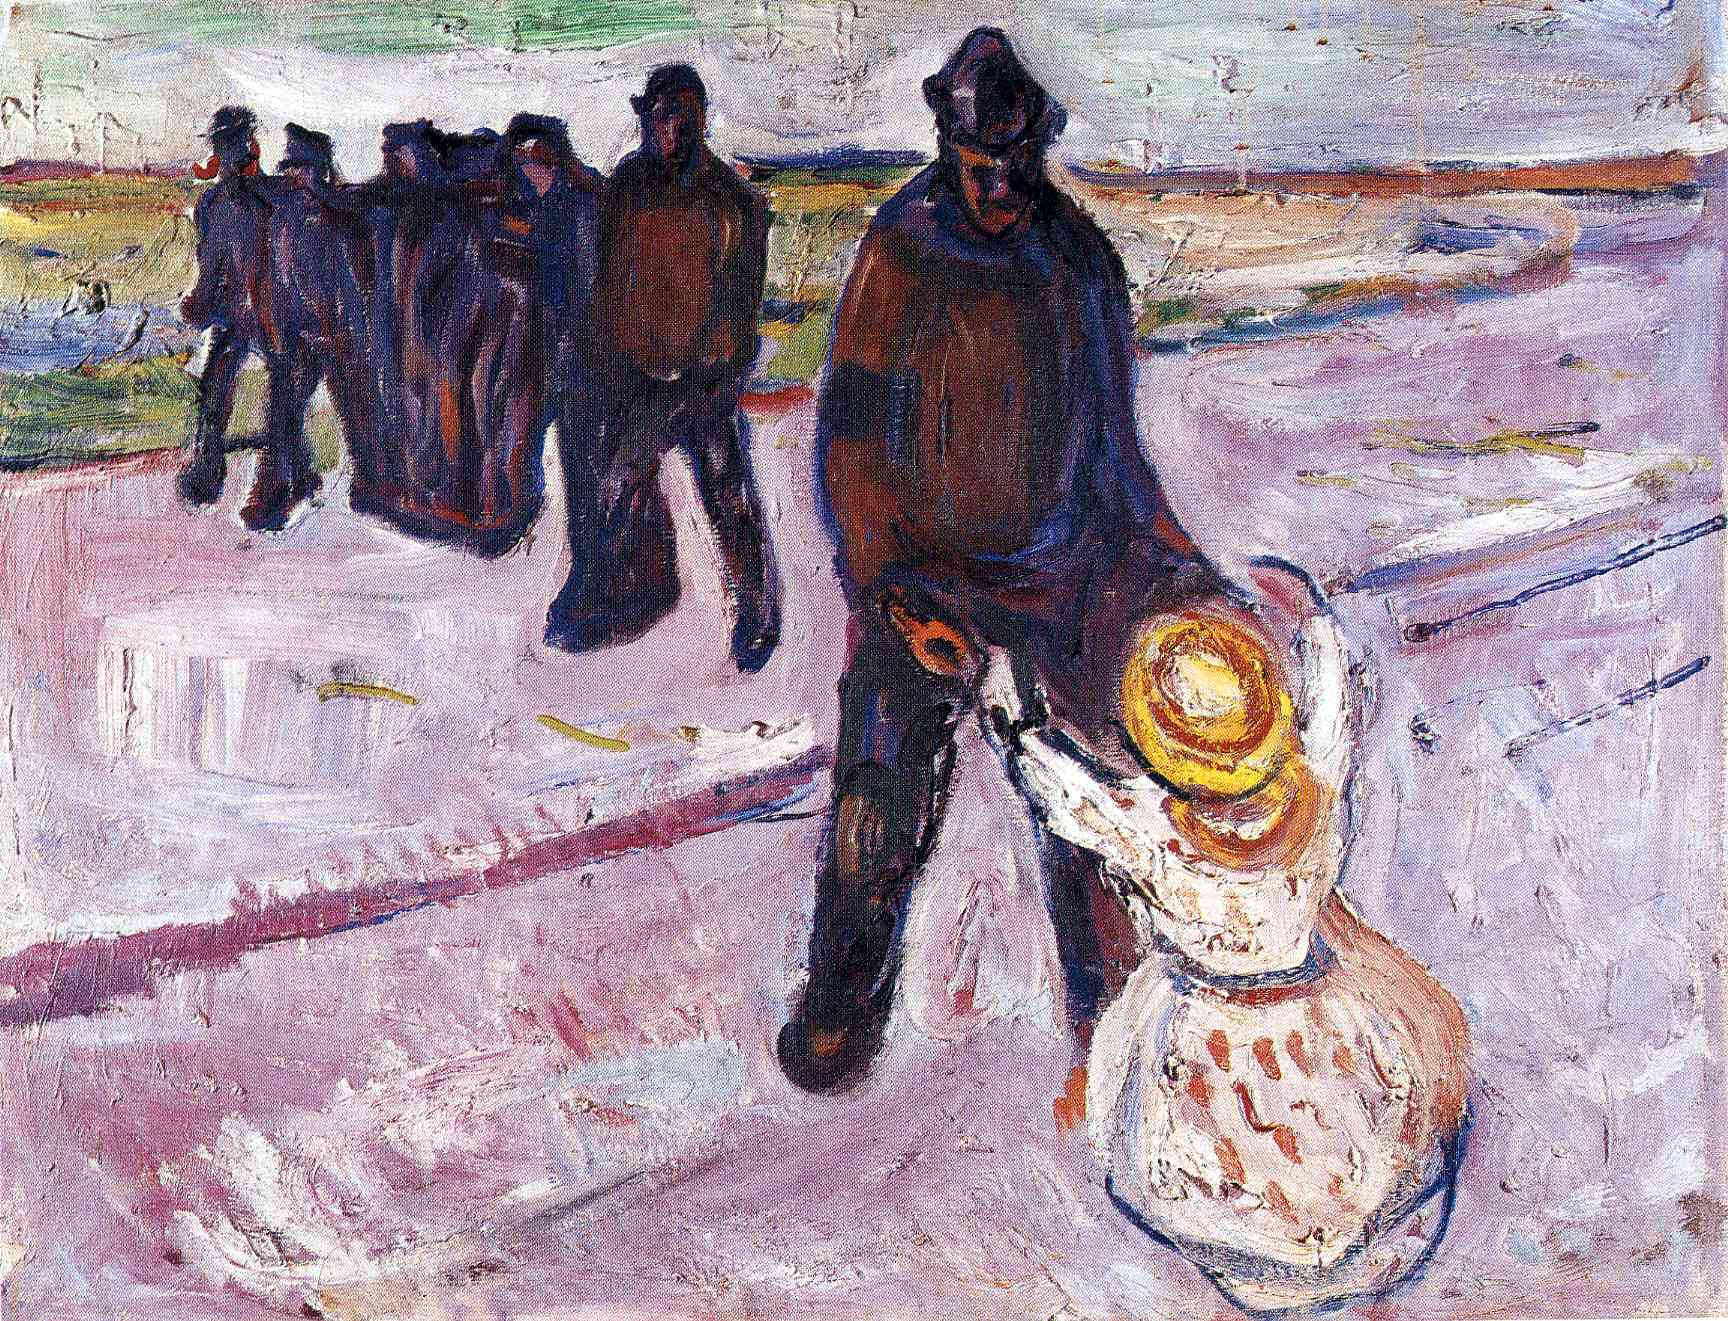 Worker and Child by Edvard Munch - 1907 - 70 x 91 cm private collection